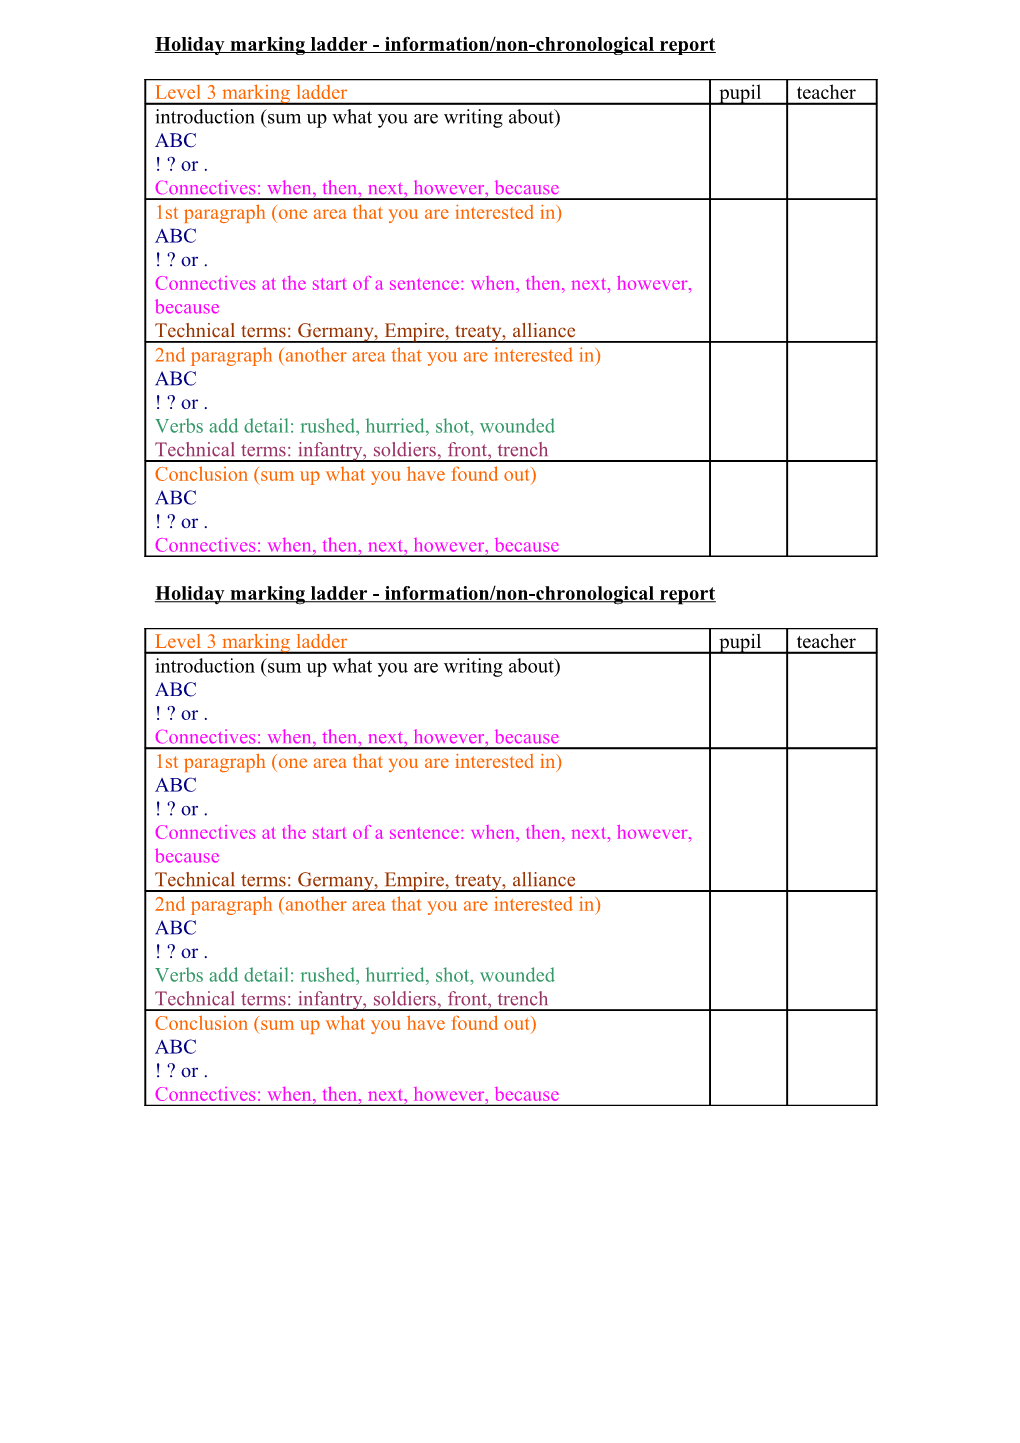 Holiday Marking Ladder - Information/Non-Chronological Report